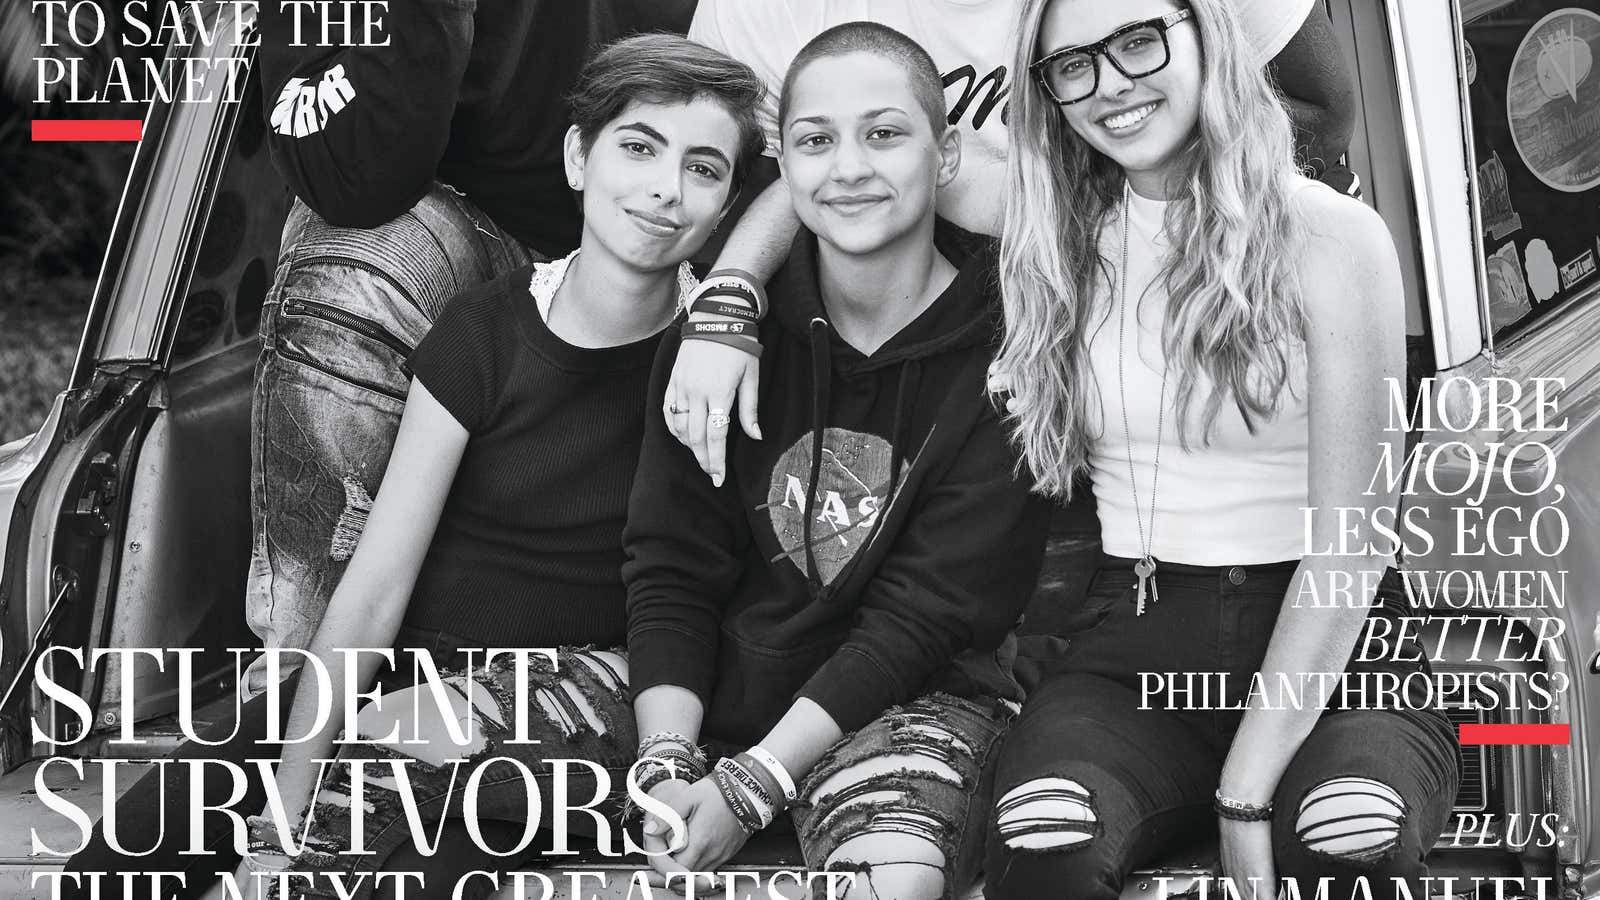 The Parkland survivors grace the cover of Town &amp; Country, a luxury travel magazine.